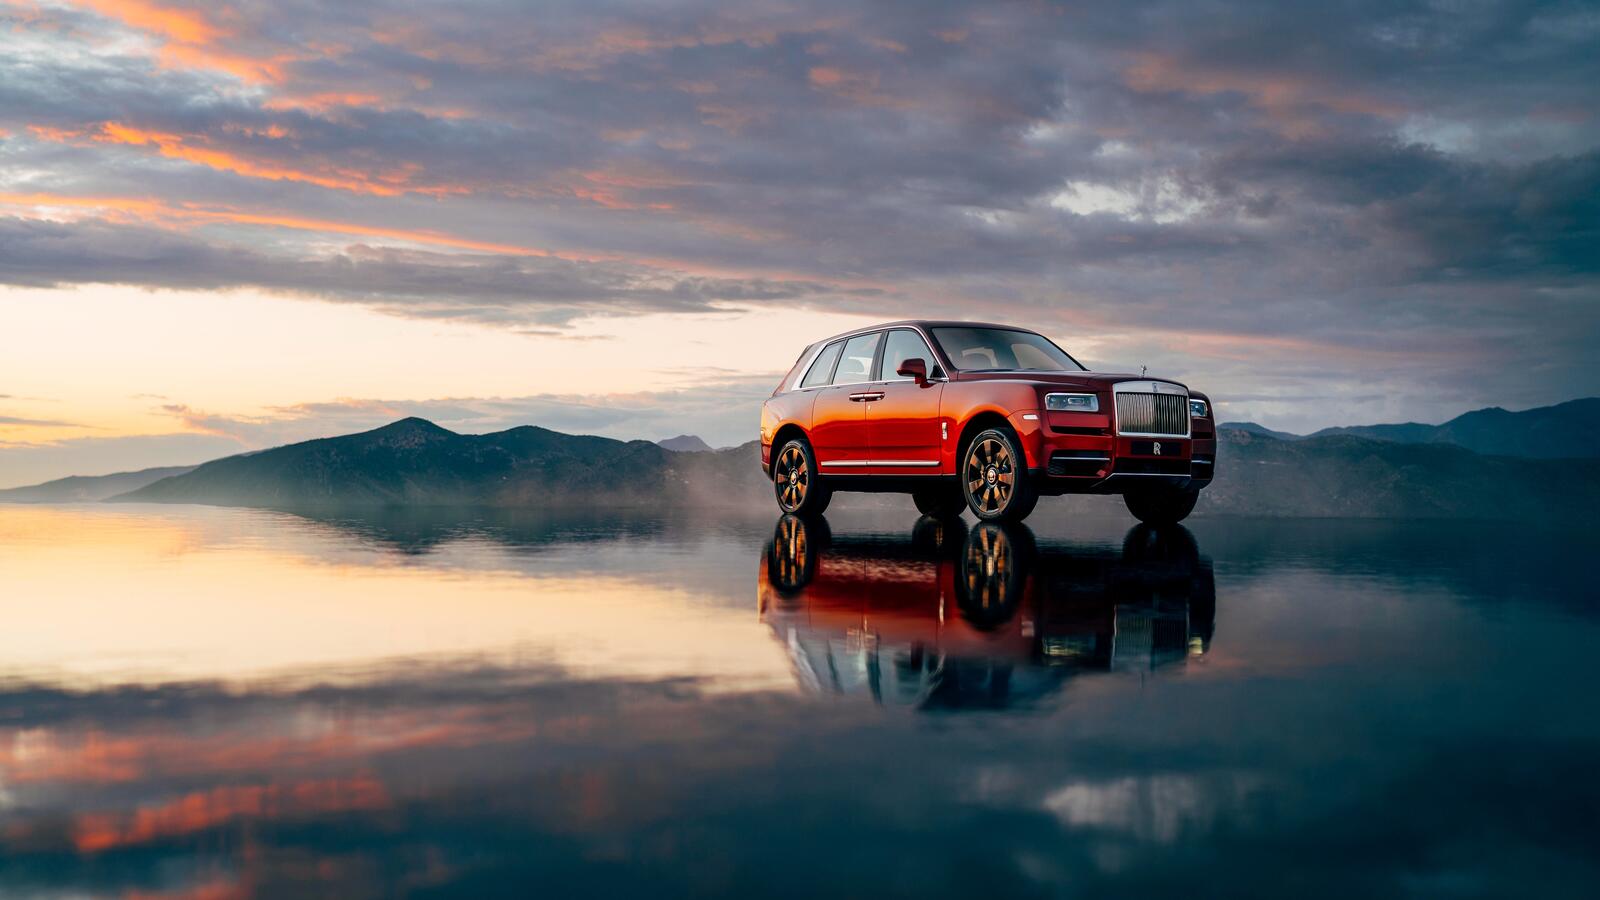 Wallpapers luxury suv cars red reflection on the desktop